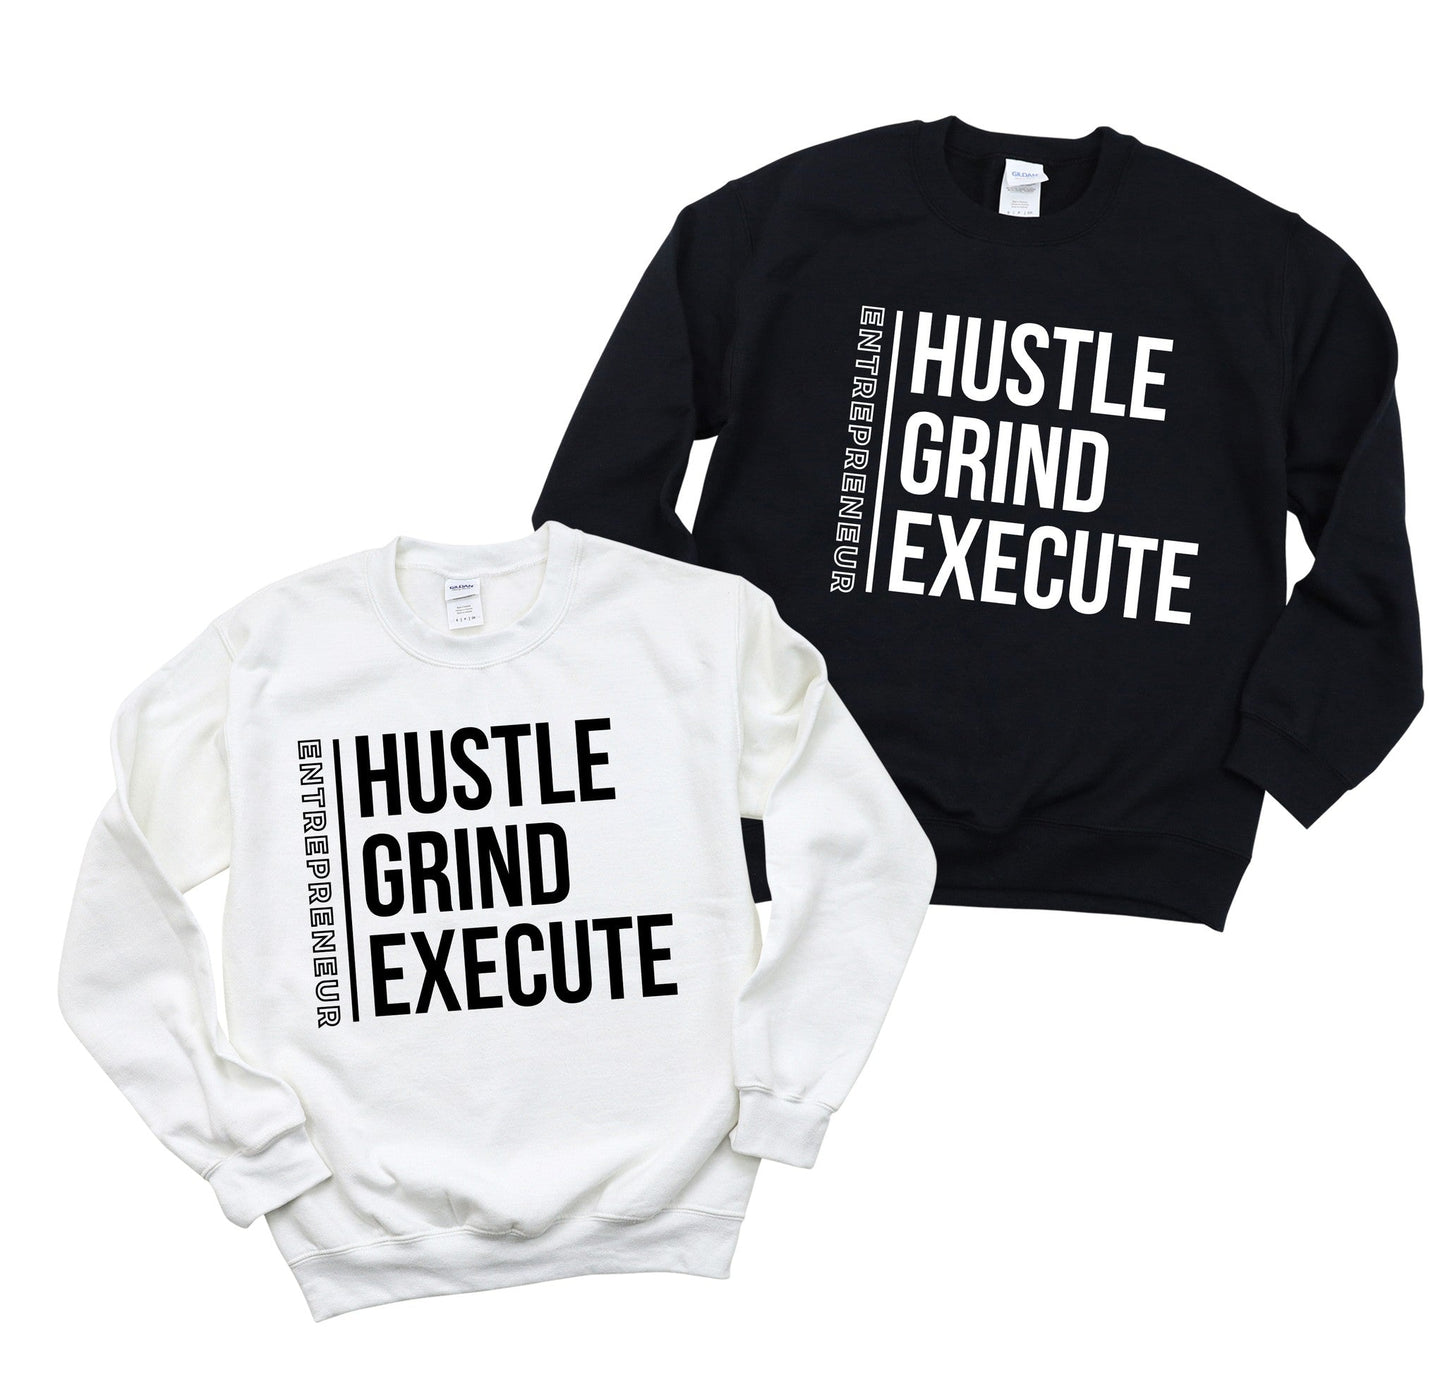 Hustle Grind Execute (White Print Only)